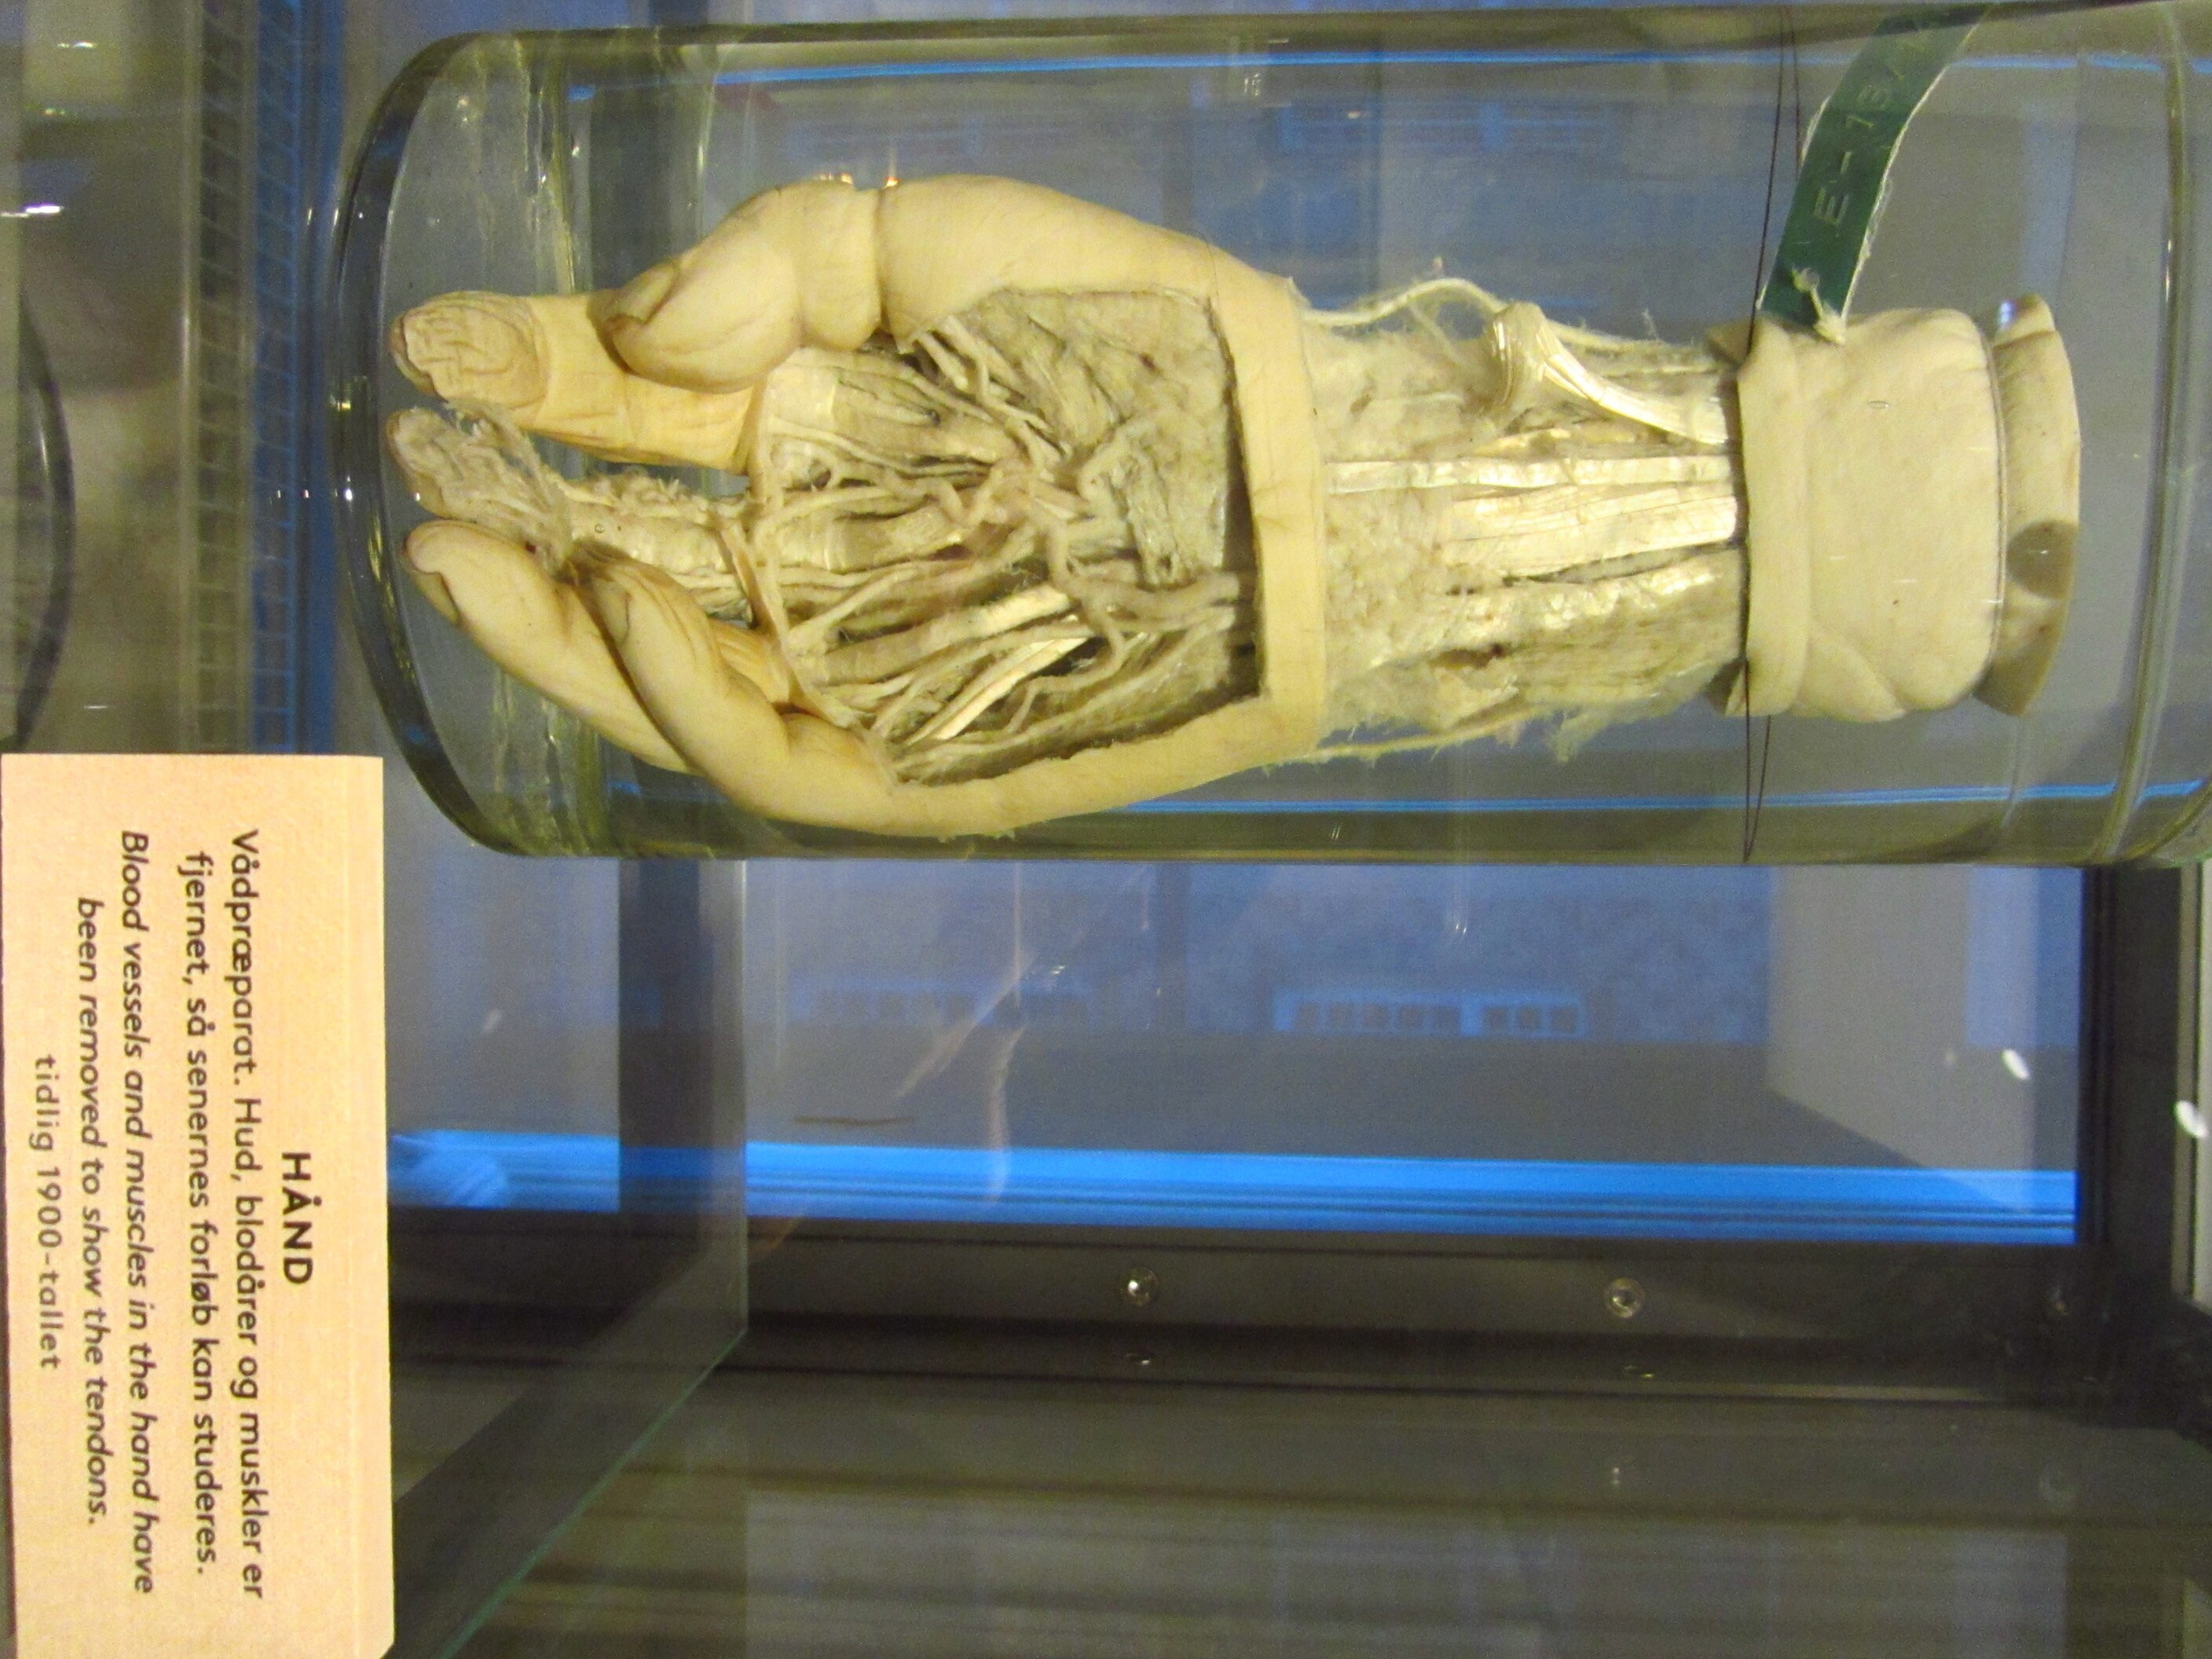 Photo 3: Left: Tendons of a hand, early 20th century.